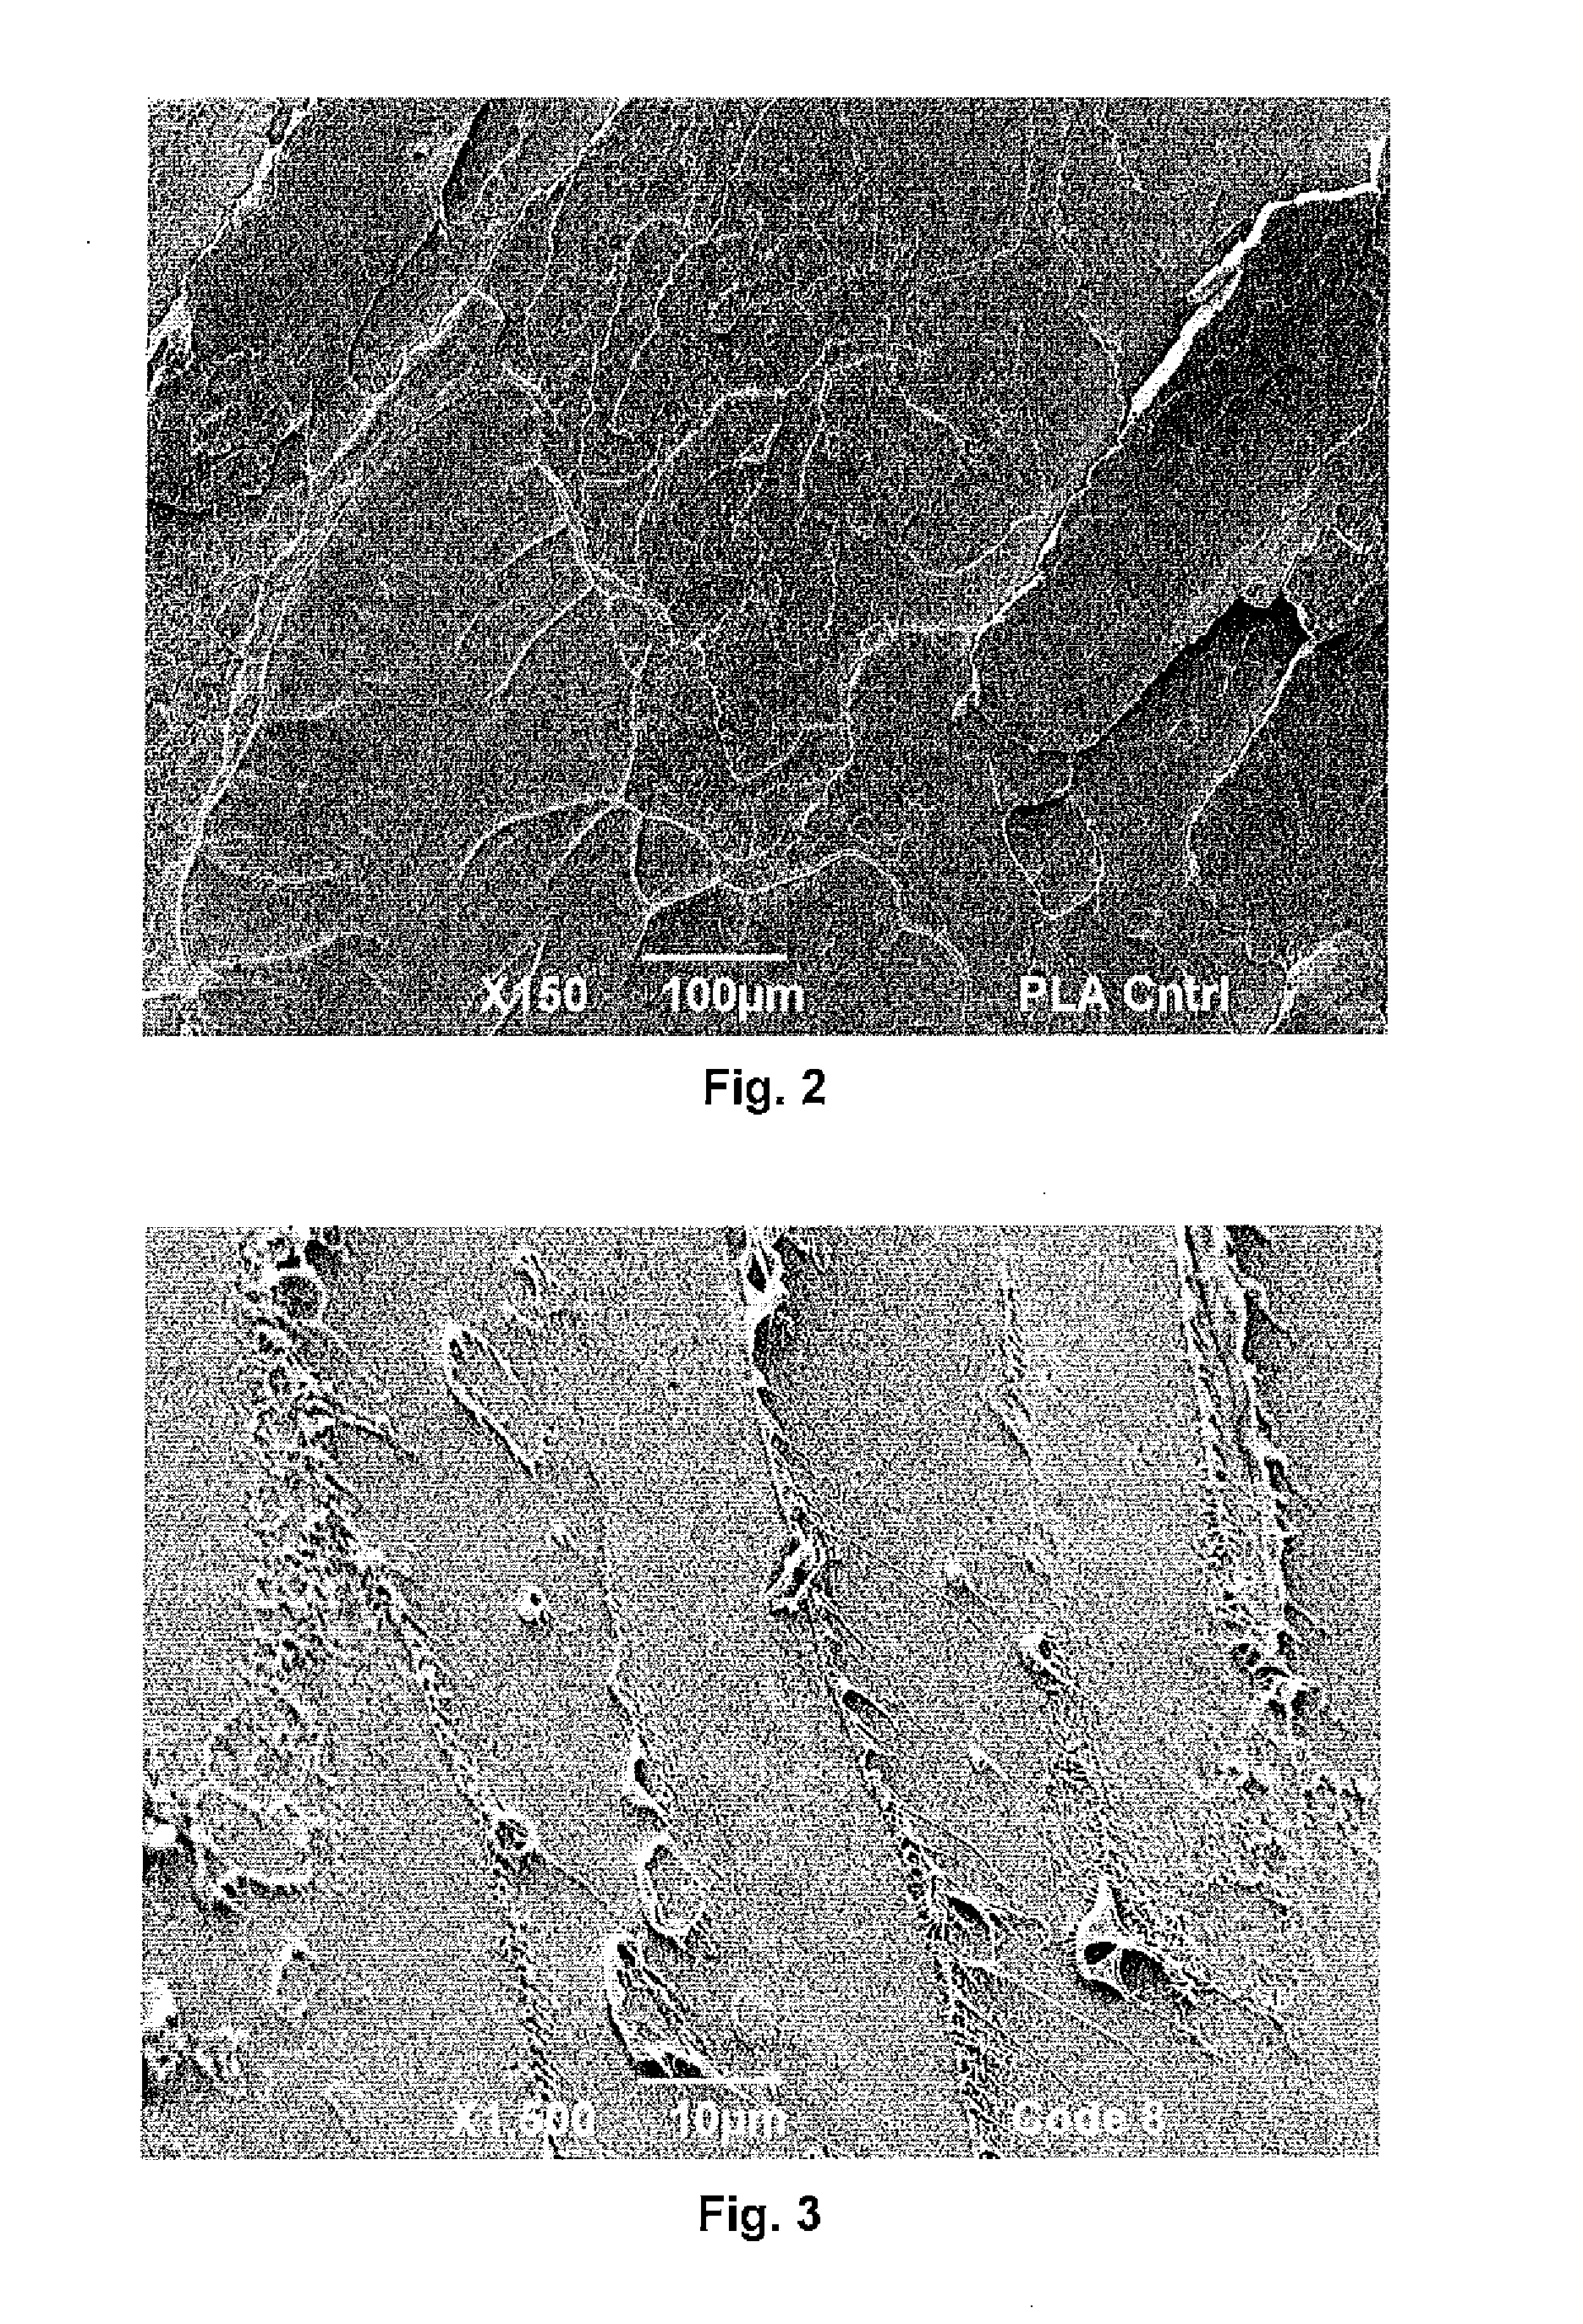 Rigid Renewable Polyester Compositions having a High Impact Strength and Tensile Elongation